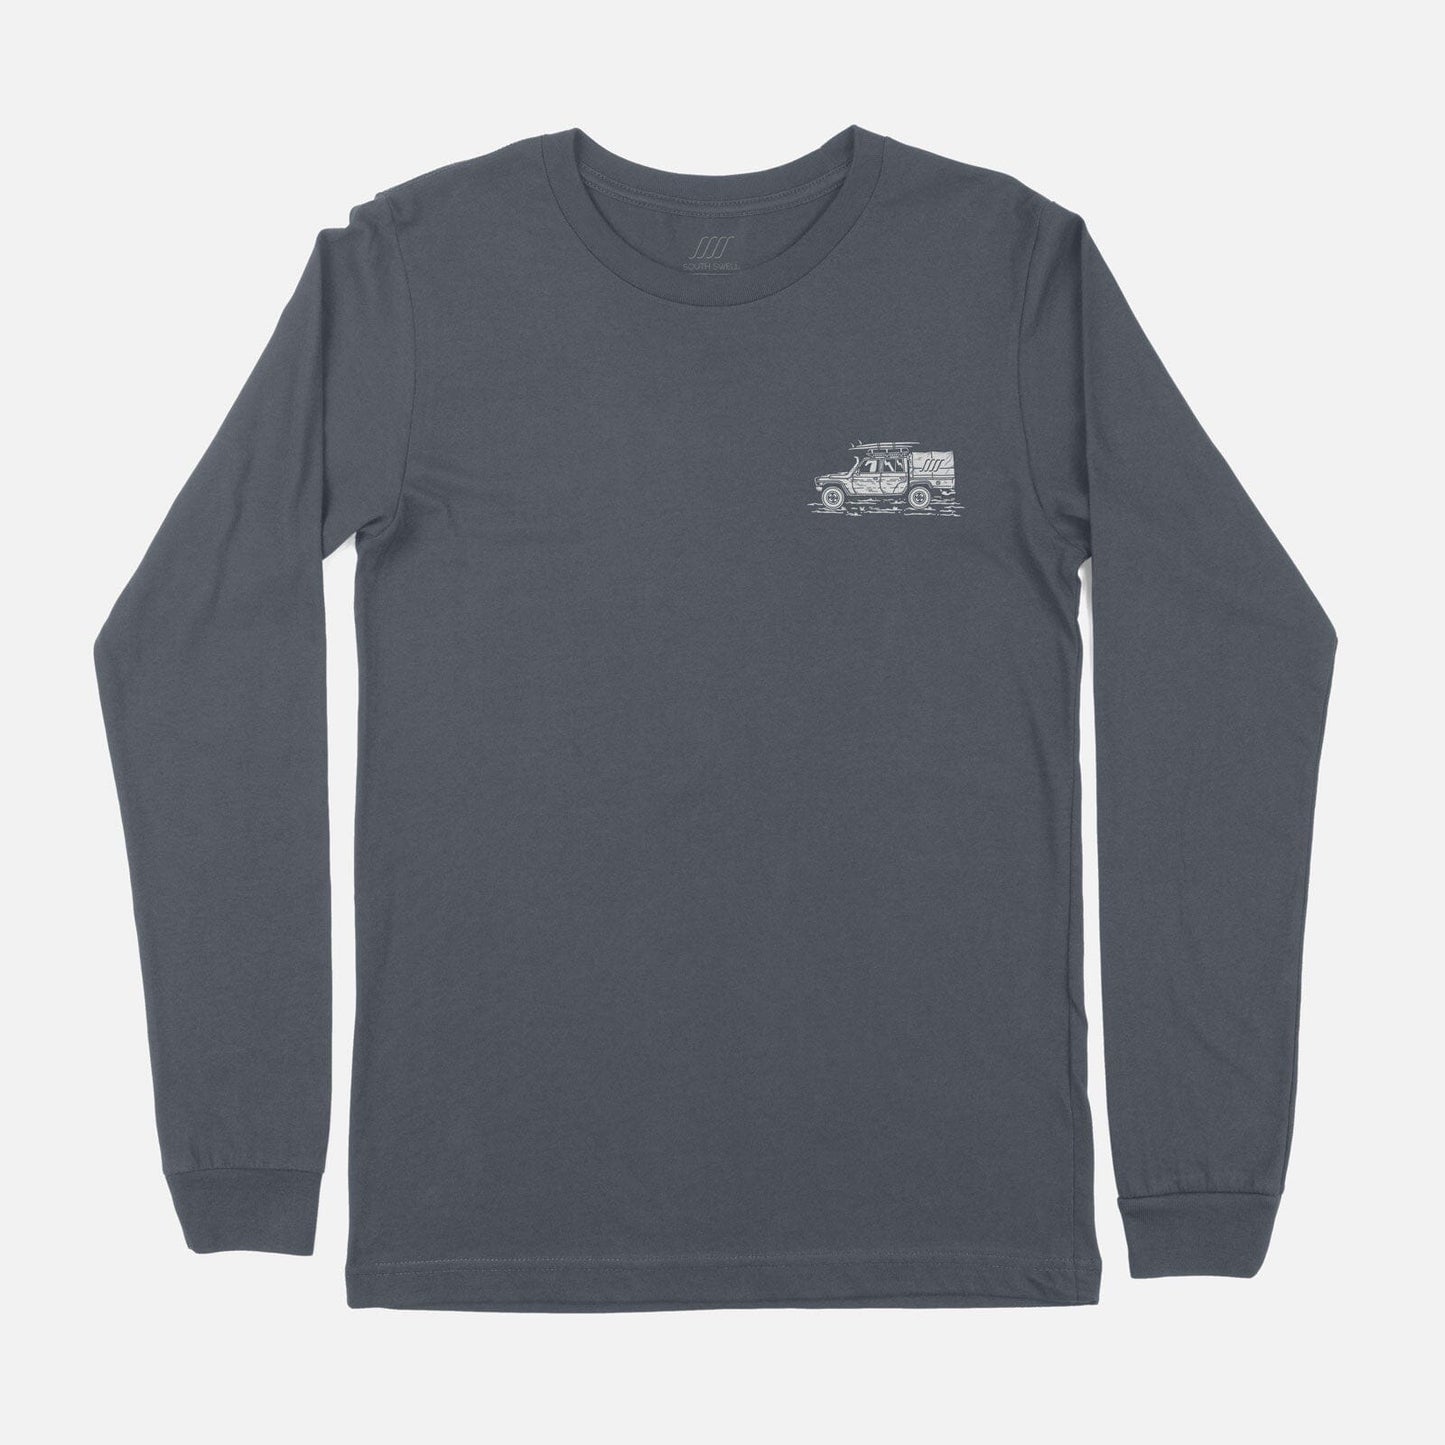 South Swell Get To The Point Longsleeve M Longsleeve Tee SOUTH SWELL 